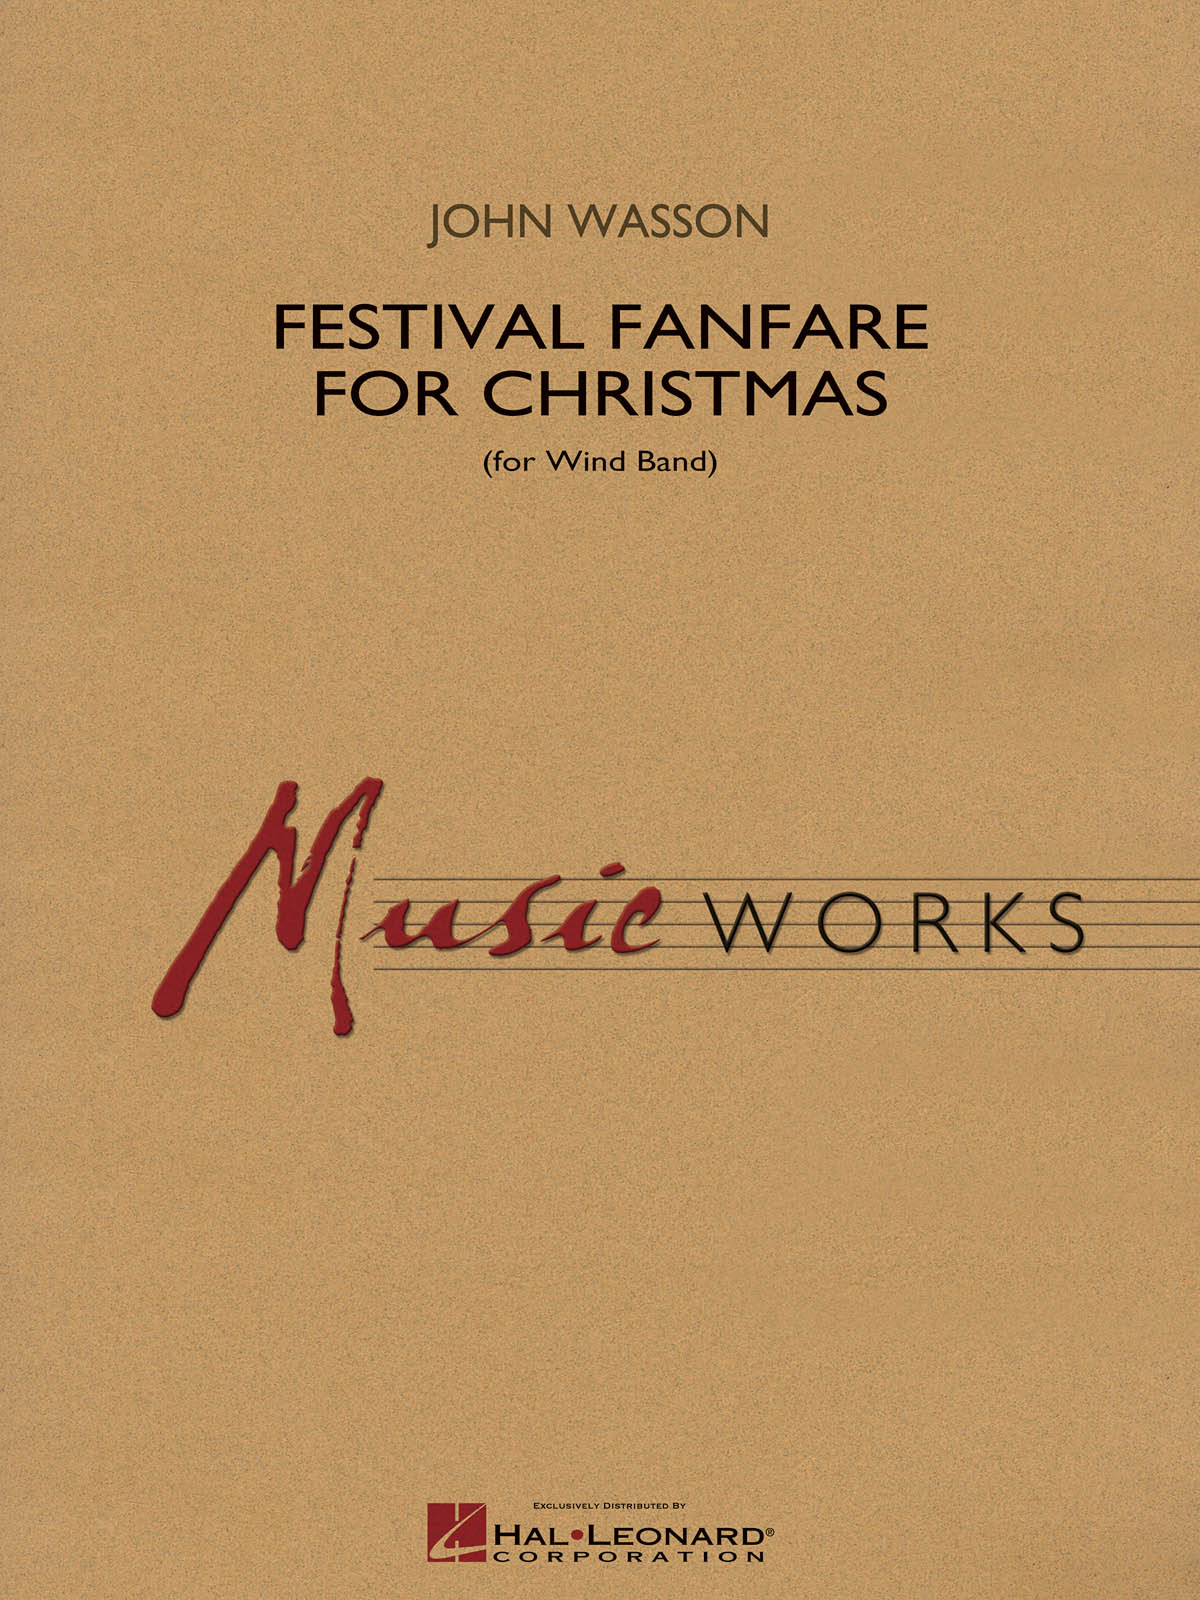 Festival Fanfare For Christmas (For Wind Band)